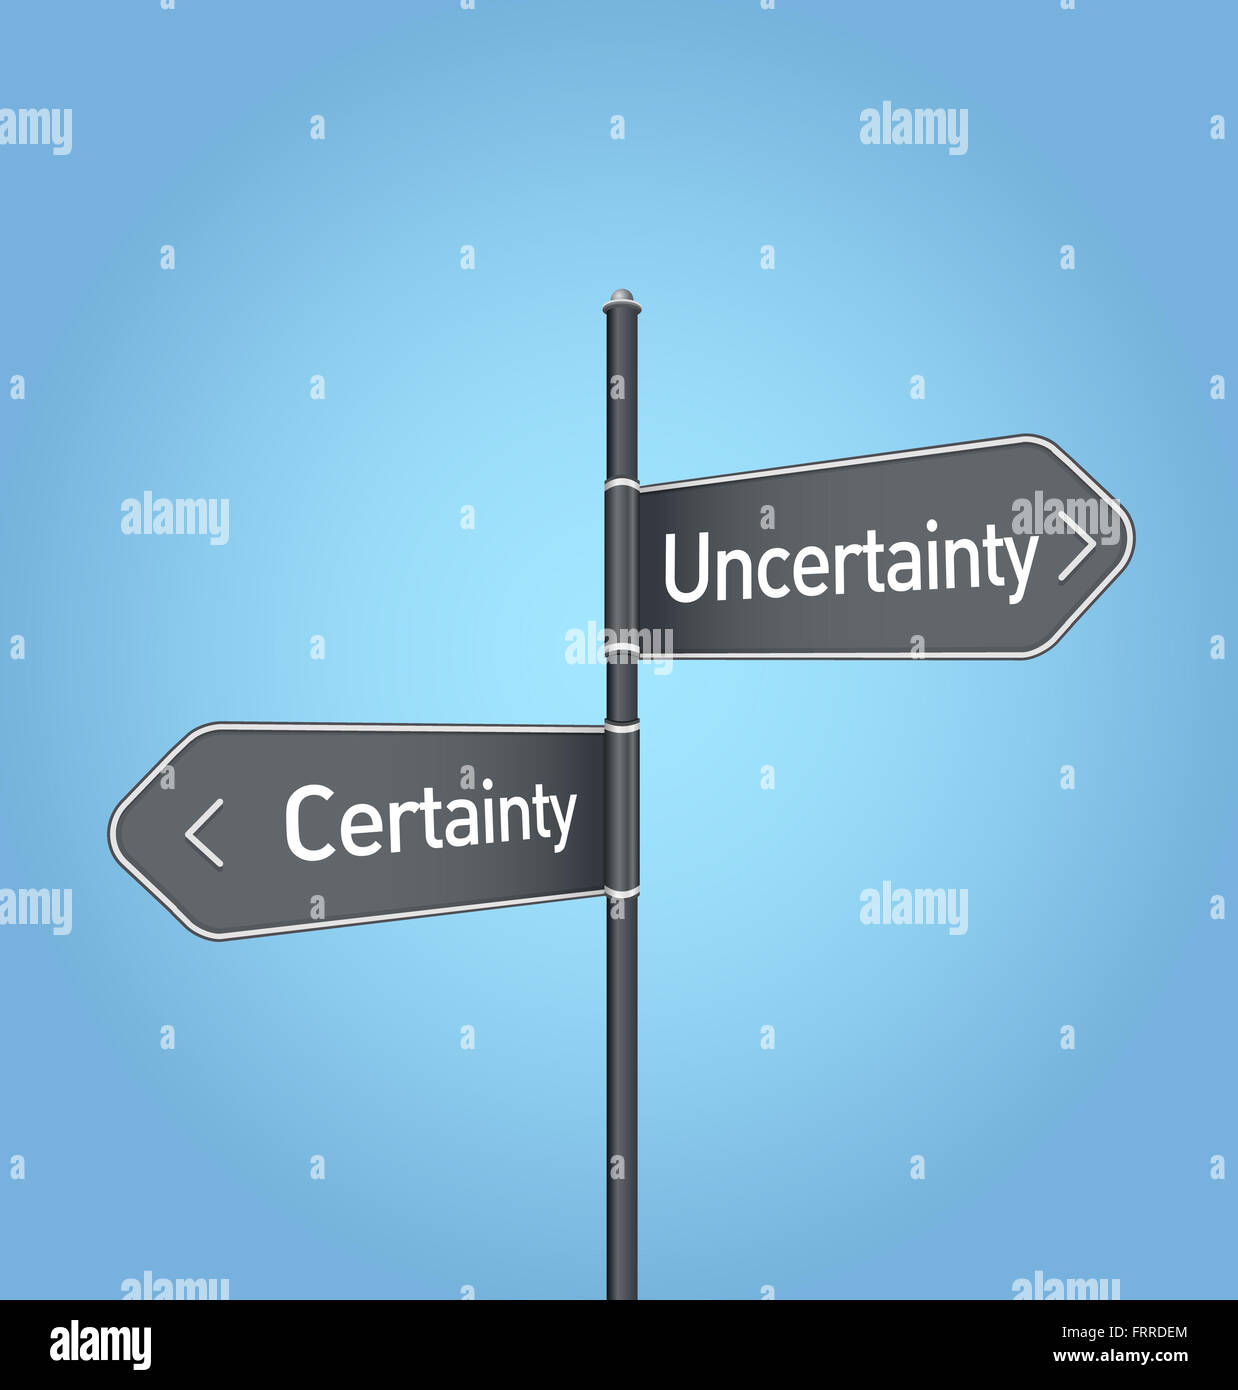 Uncertainty vs certainty choice concept road sign on blue background Stock Photo